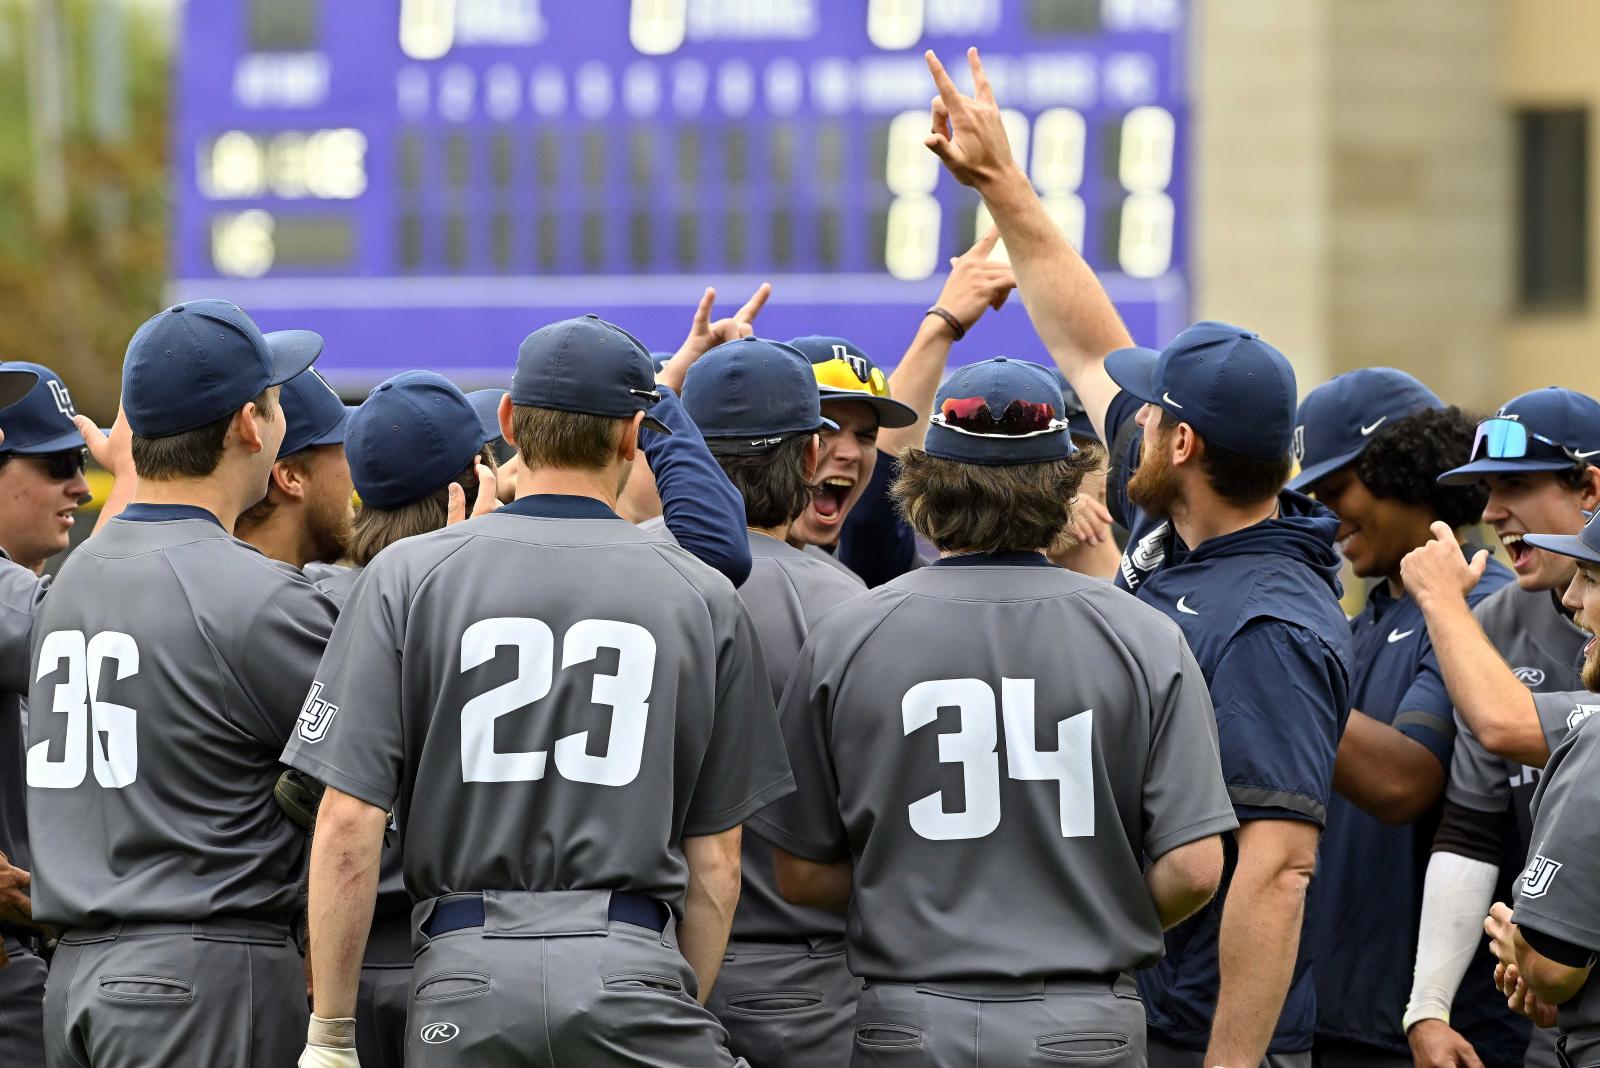 The Vikings baseball team gathers together at the start of the NCAA Division III Tournament regional in Stevens Point. (Photo by Paul Wilke)